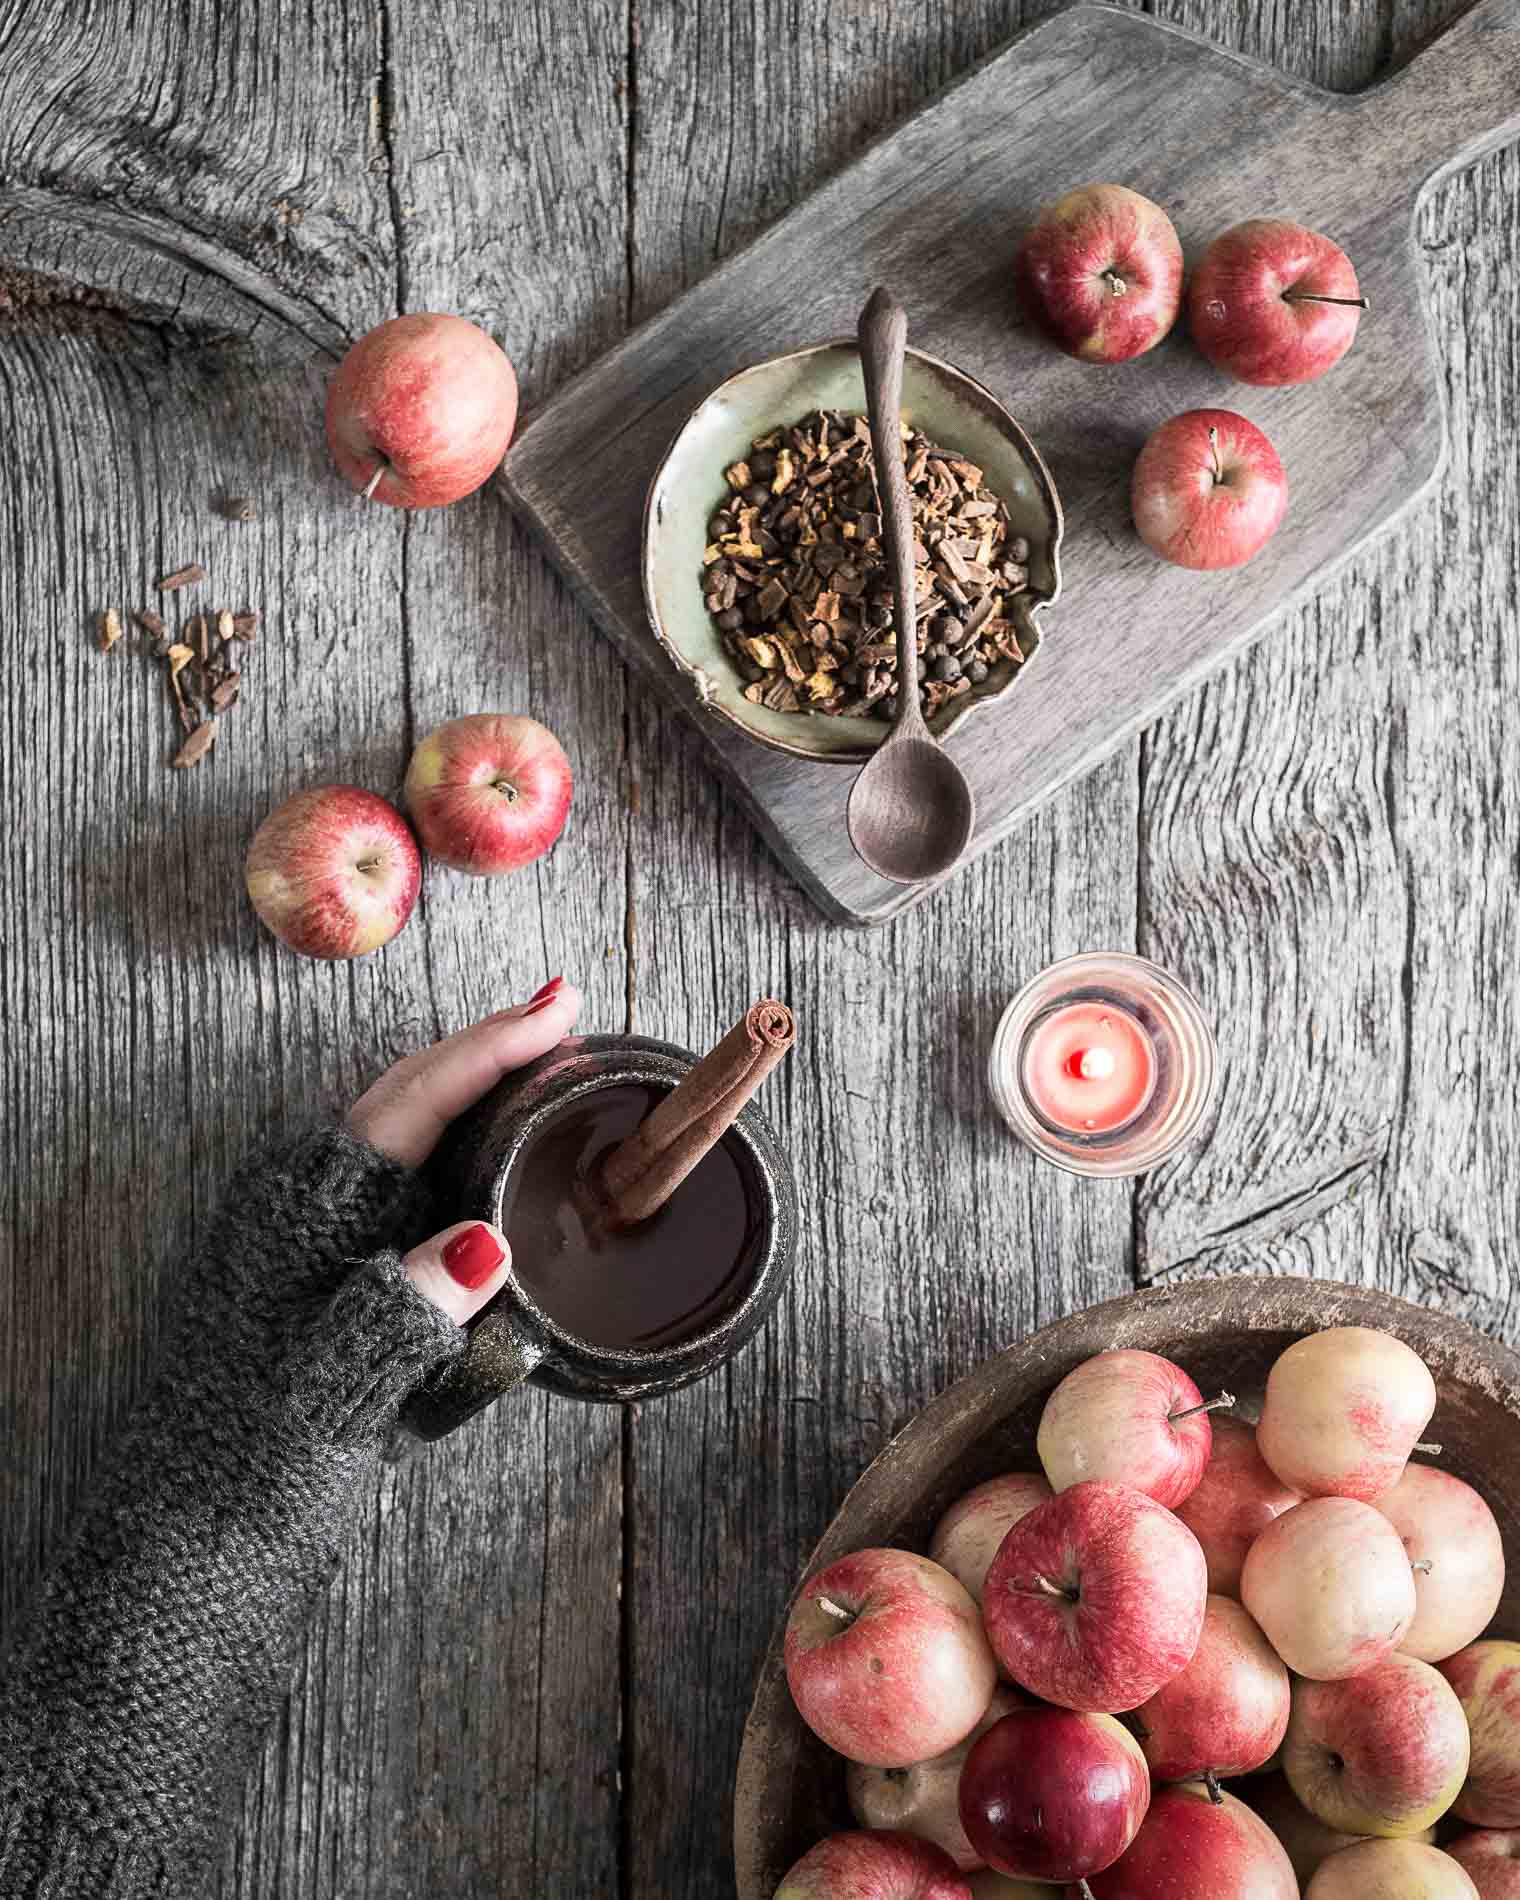 Homemade apple cider is so easy to make, I’m shocked I haven’t tried it before! But I suppose the only time I'd think about making apple cider is when I have so many apples I don't know what to do with them—which is what happened this year. Keeping With the Times